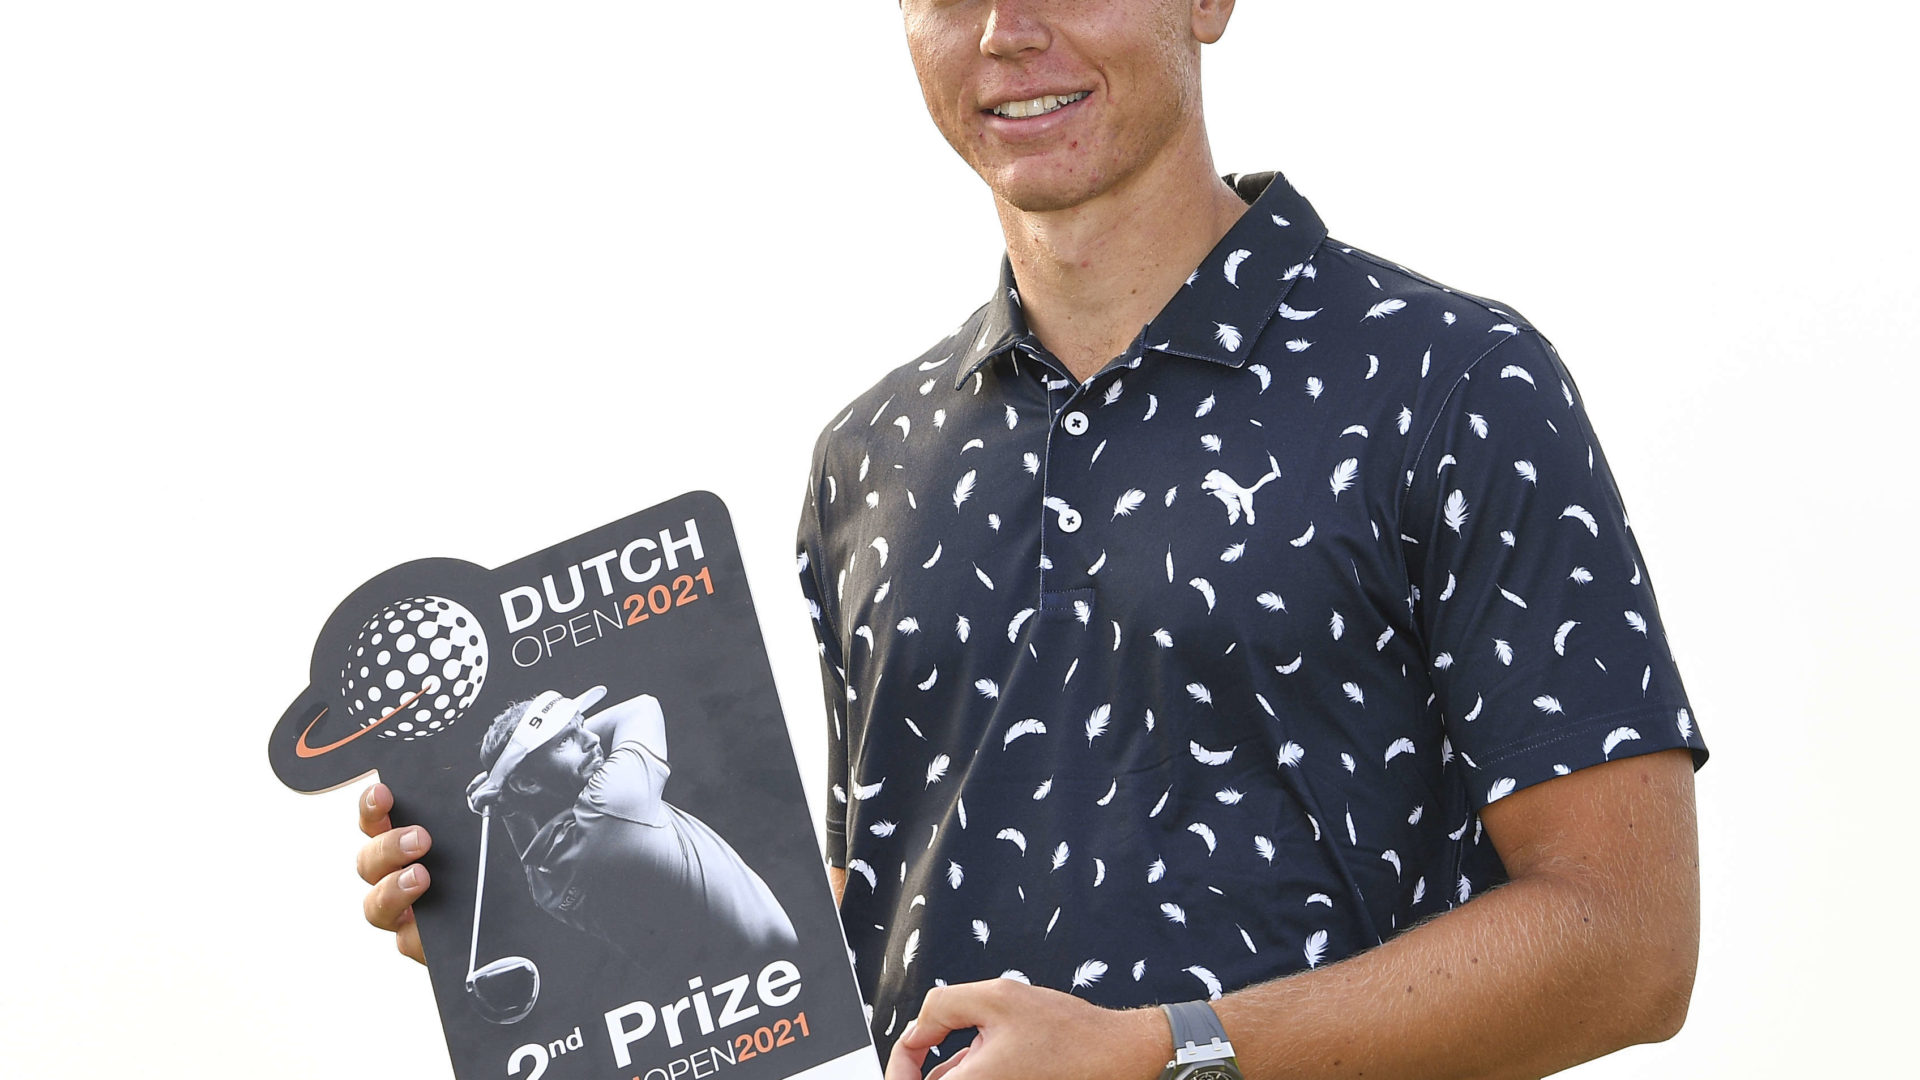 'S-HERTOGENBOSCH, NETHERLANDS - SEPTEMBER 19: Matthias Schmid of Germany poses with the second place prize during Day Four of the Dutch Open at Bernardus Golf on September 19, 2021 in Cromvoirt, 's-Hertogenbosch, Netherlands. (Photo by Octavio Passos/Getty Images)